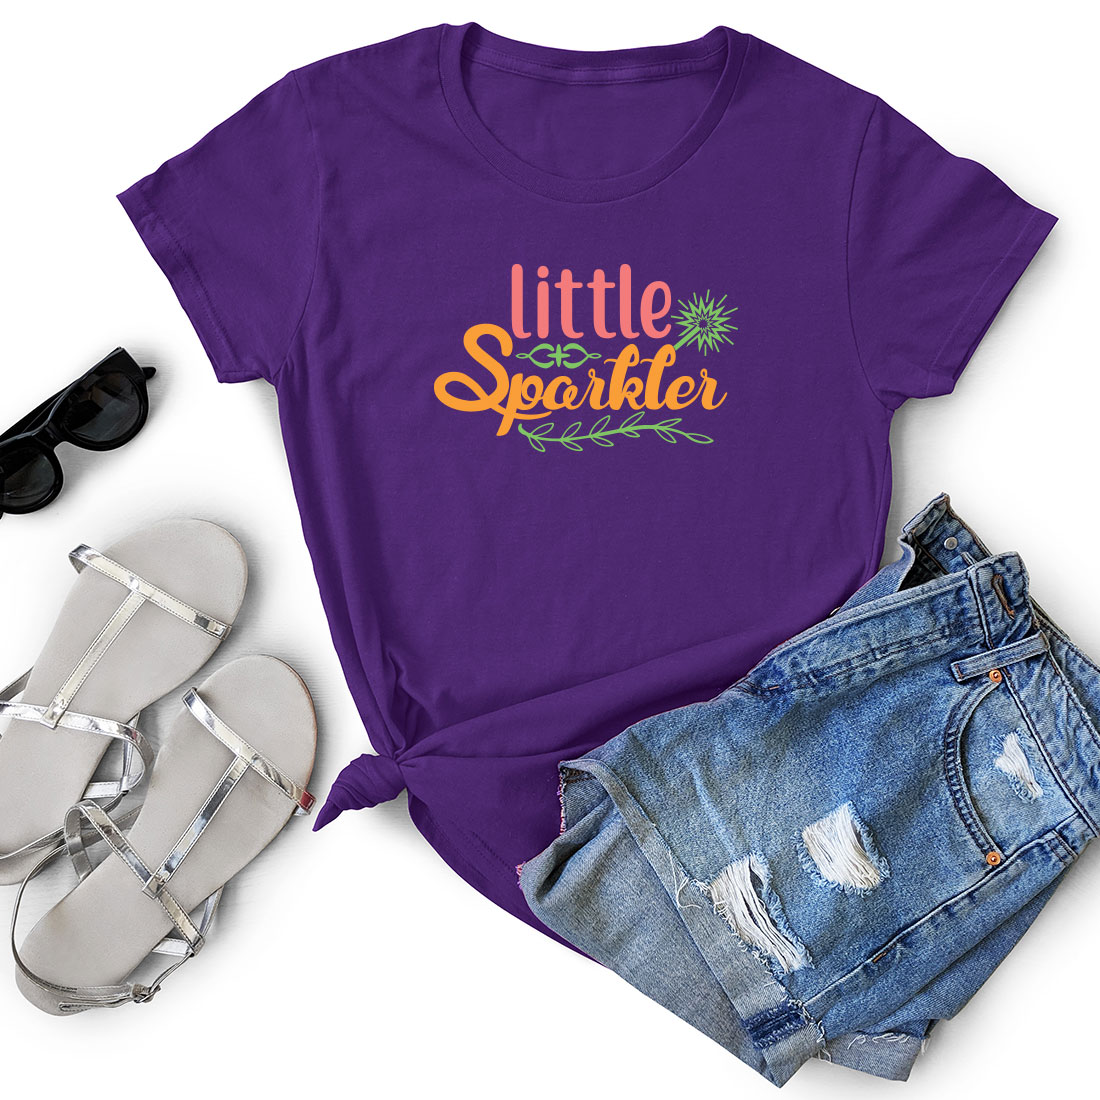 Purple shirt that says little sparkler next to a pair of shorts.